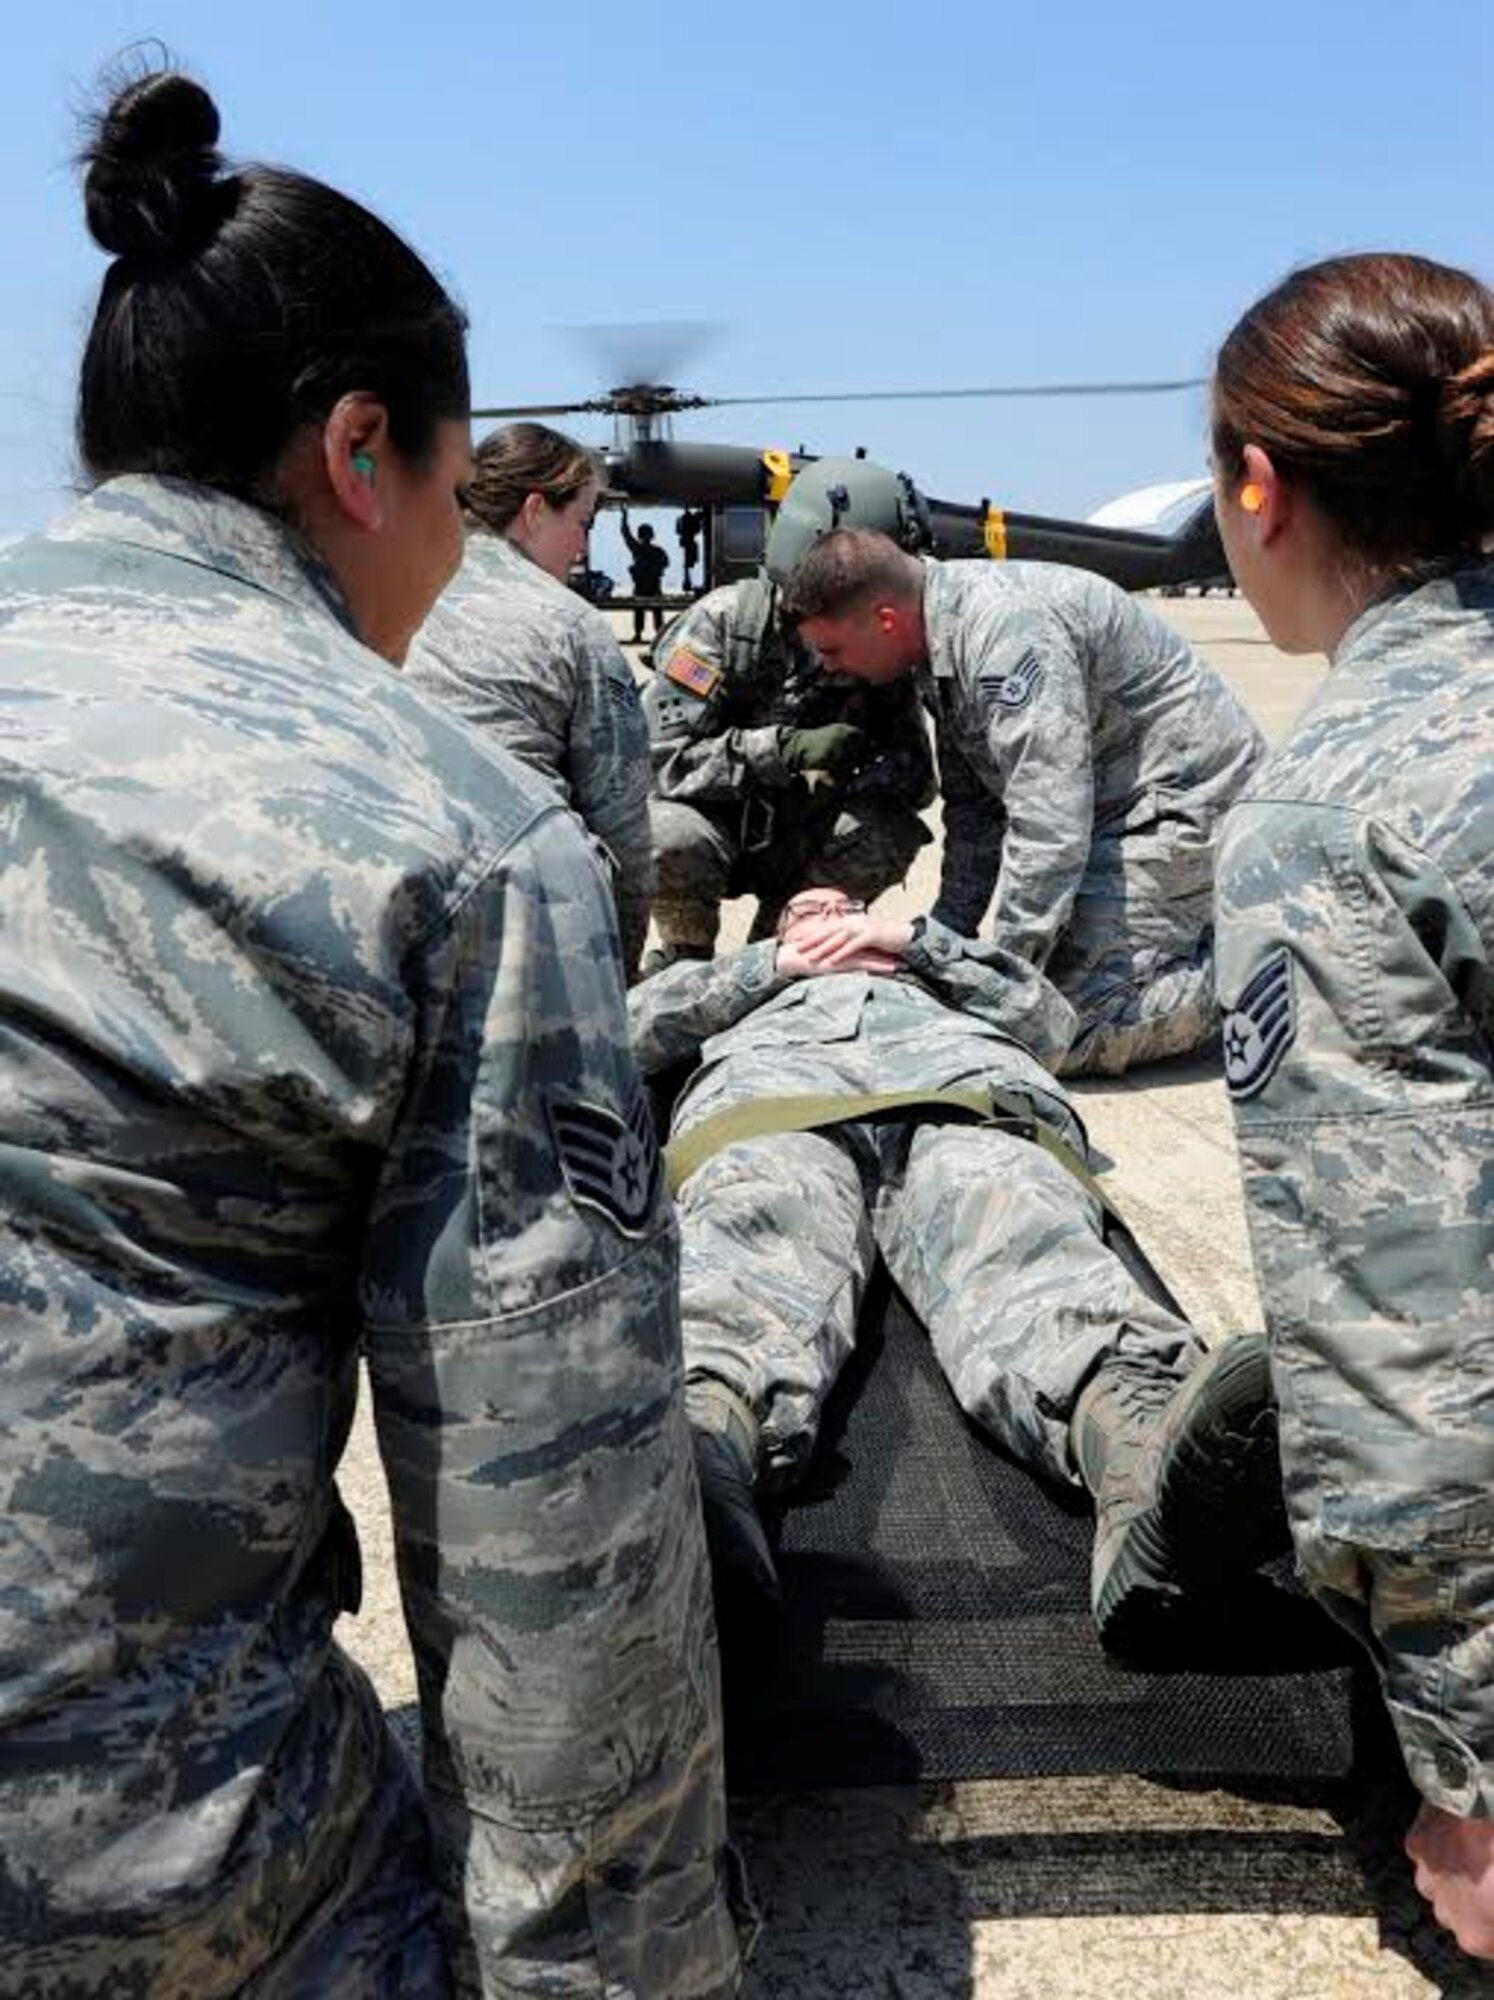 Airmen from the 8th Medical Group prepare to carry a simulated patient to a UH-60 Black Hawk medevac helicopter at Kunsan Air Base, Republic of Korea, May 17, 2017. The purpose of the training was aimed to train medics on loading patients onto a helicopter for dust-off. (U.S. Air Force photo/Staff Sgt. Chelsea Sweatt)